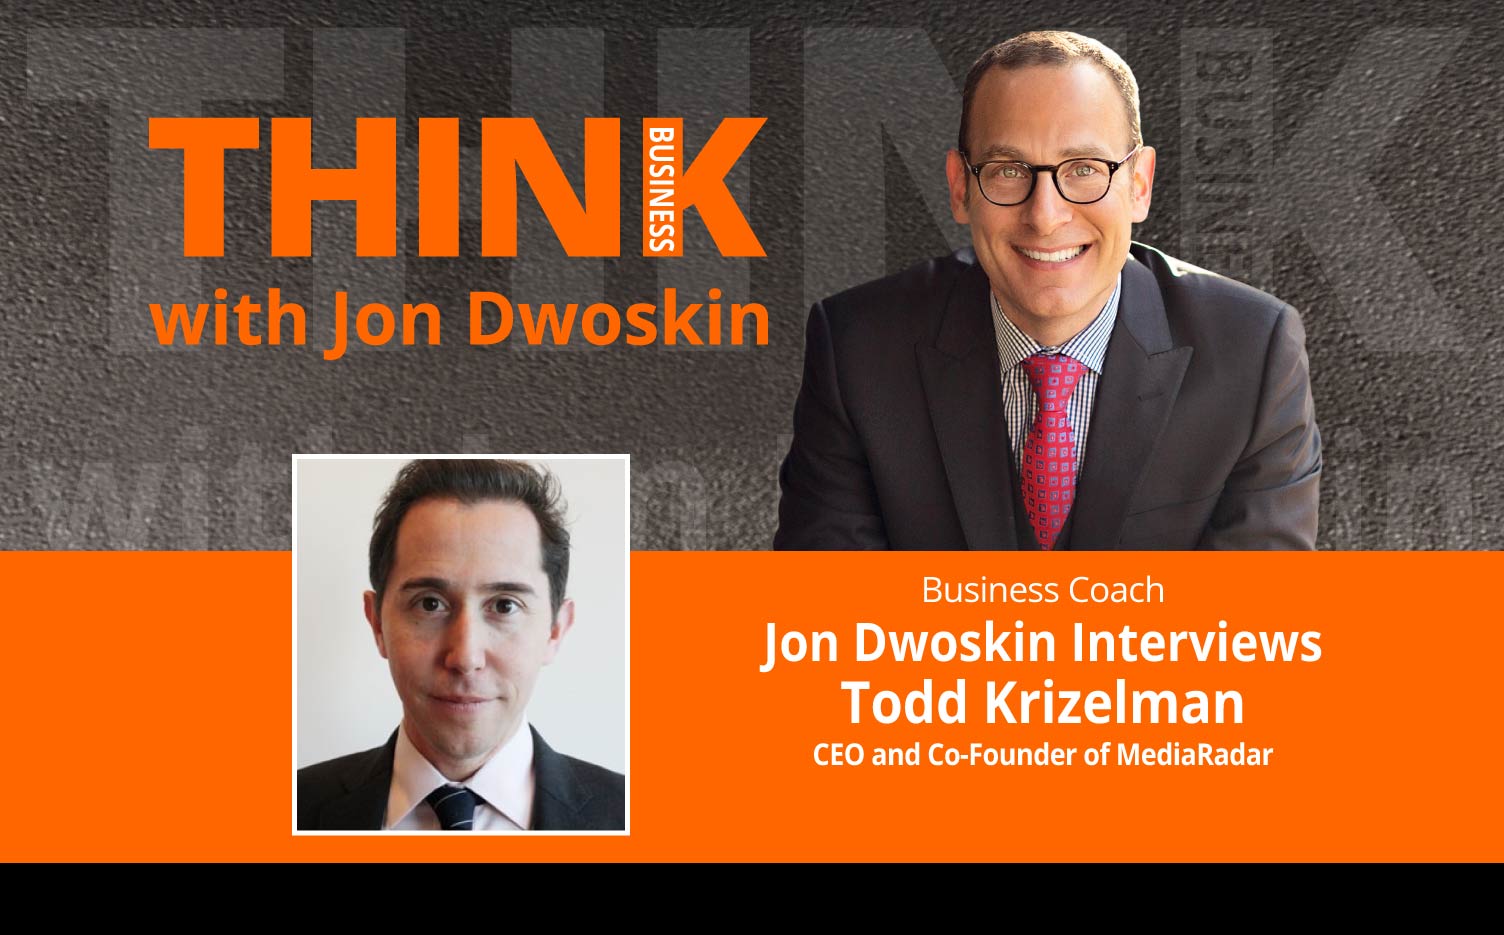 THINK Business Podcast: Jon Dwoskin Interviews Todd Krizelman, CEO and Co-Founder of MediaRadar